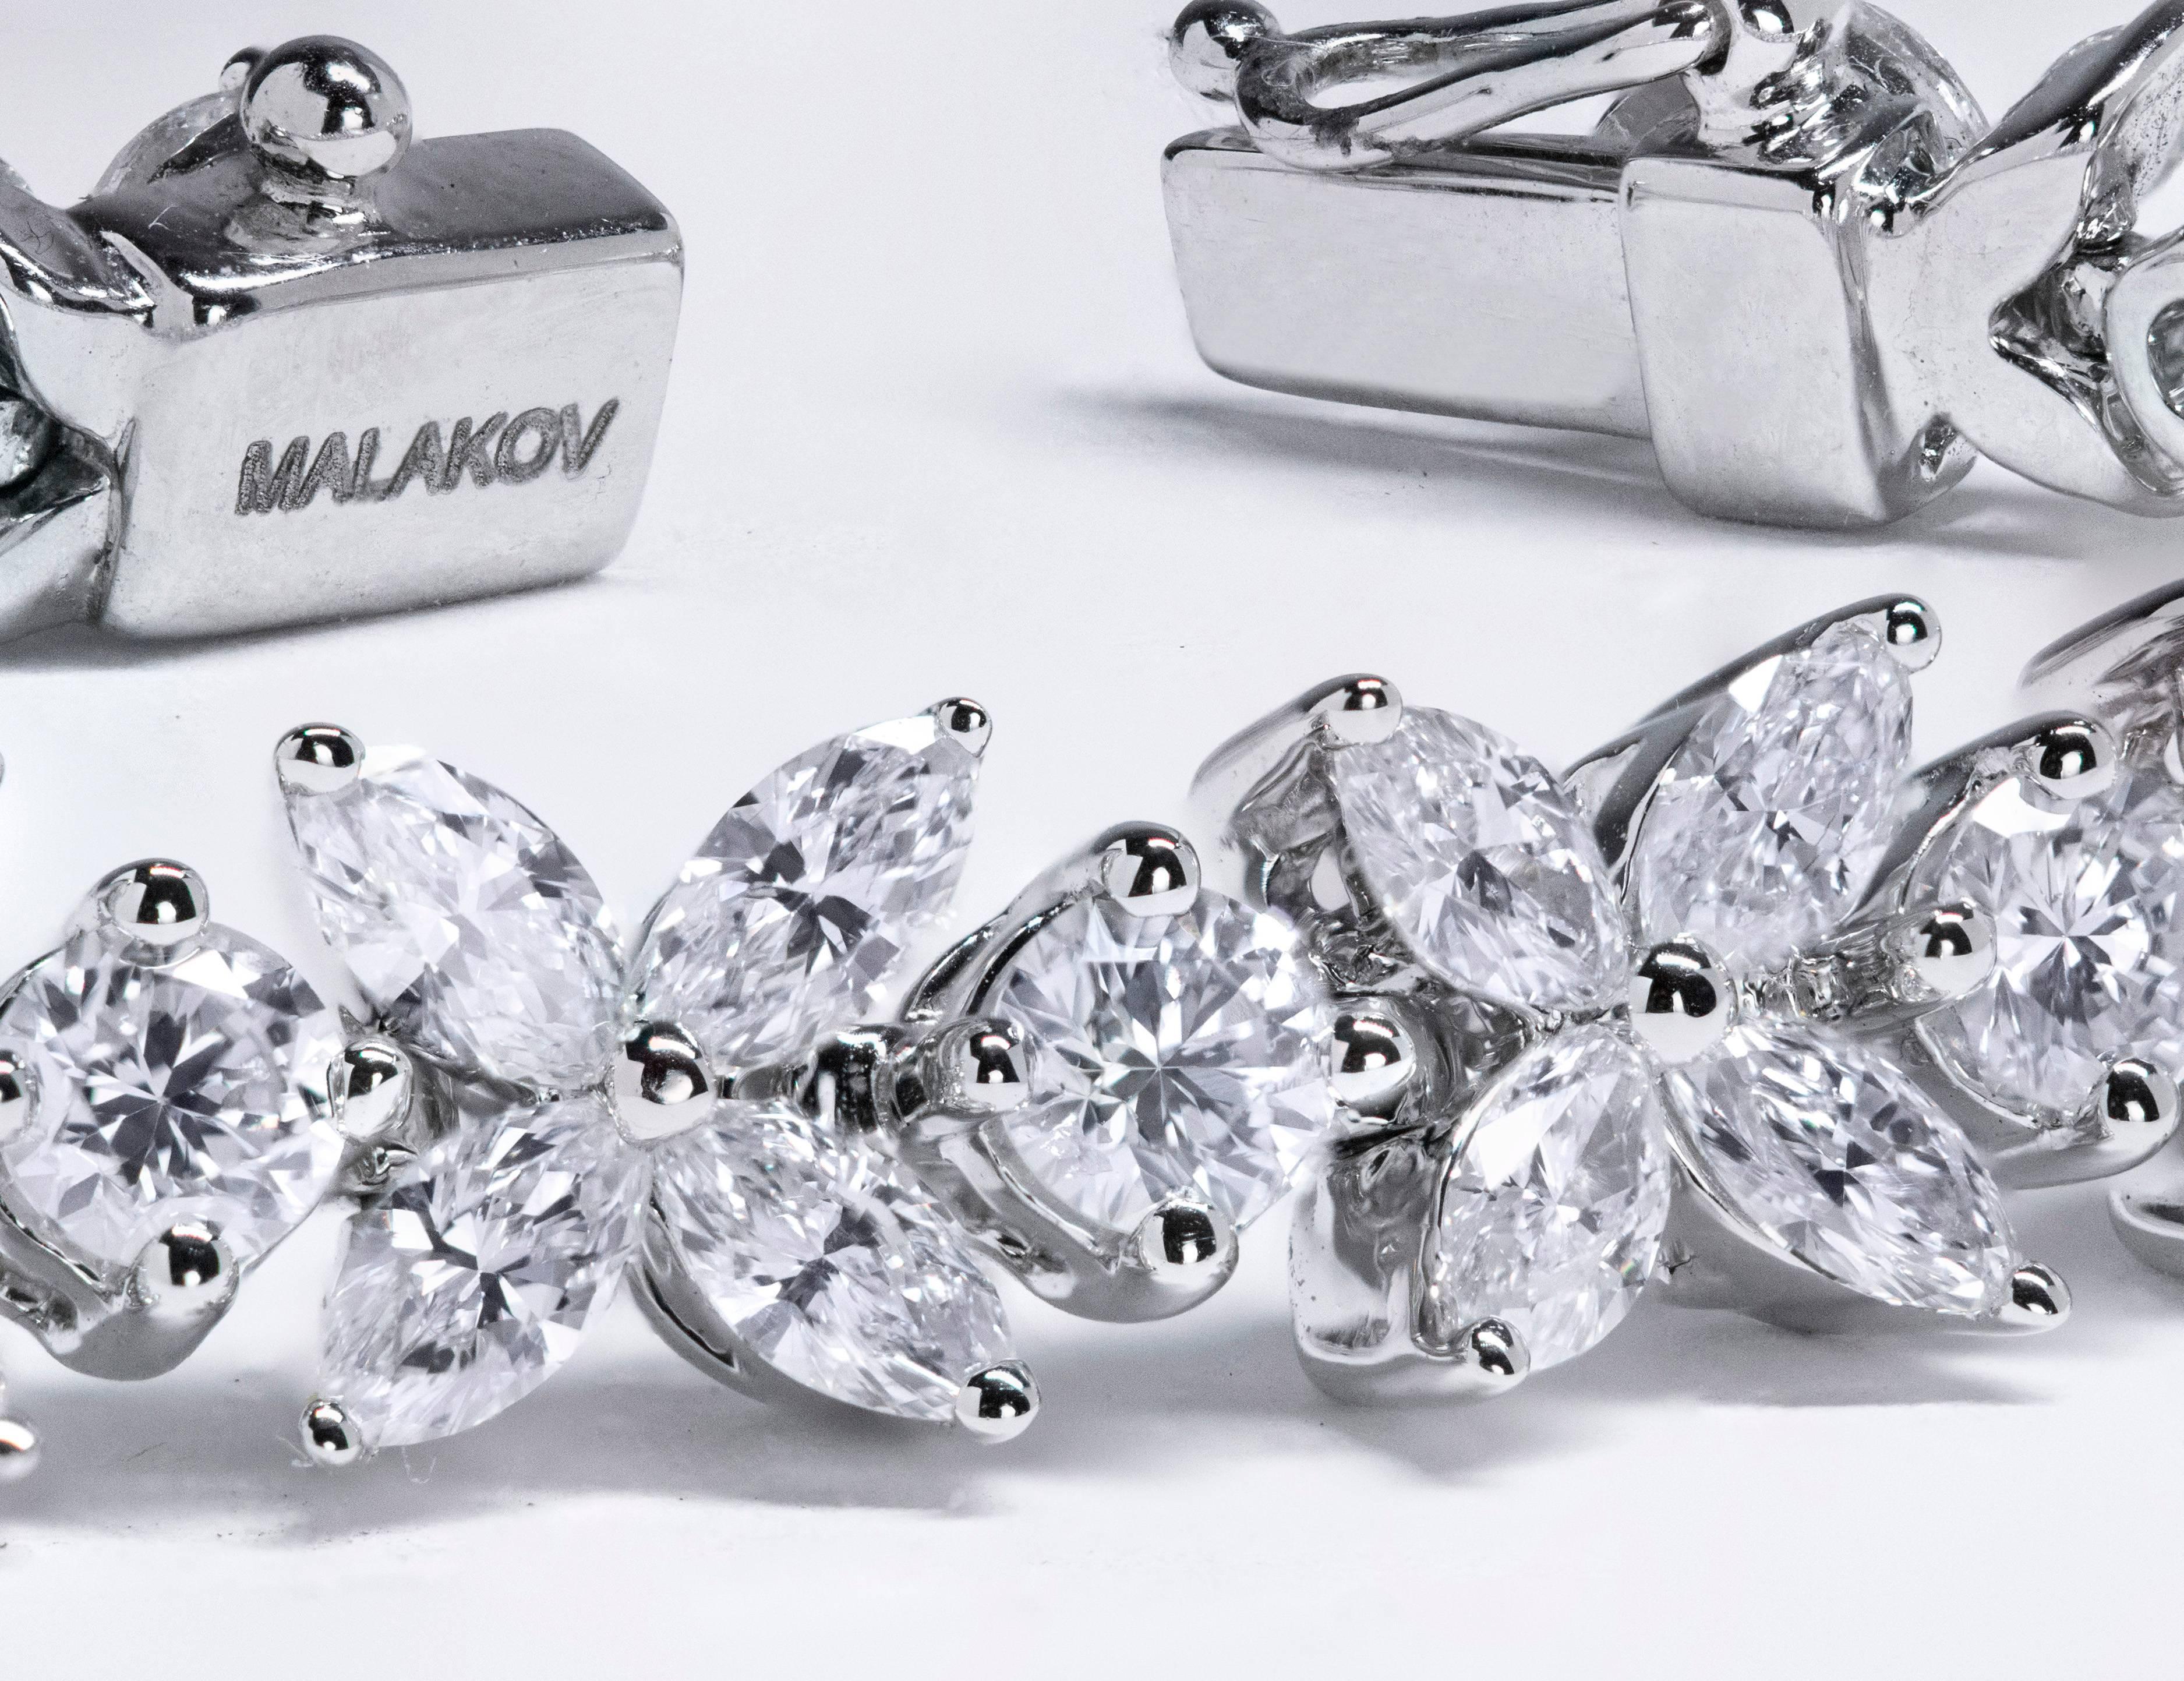 This bracelet features marquee cut diamonds set in a flower-like setting with a brilliant round diamond set after each link. Total weight of the marquise cut and round cut diamonds are 4.24 carats and 1.99 carats respectively. Made in 18k white